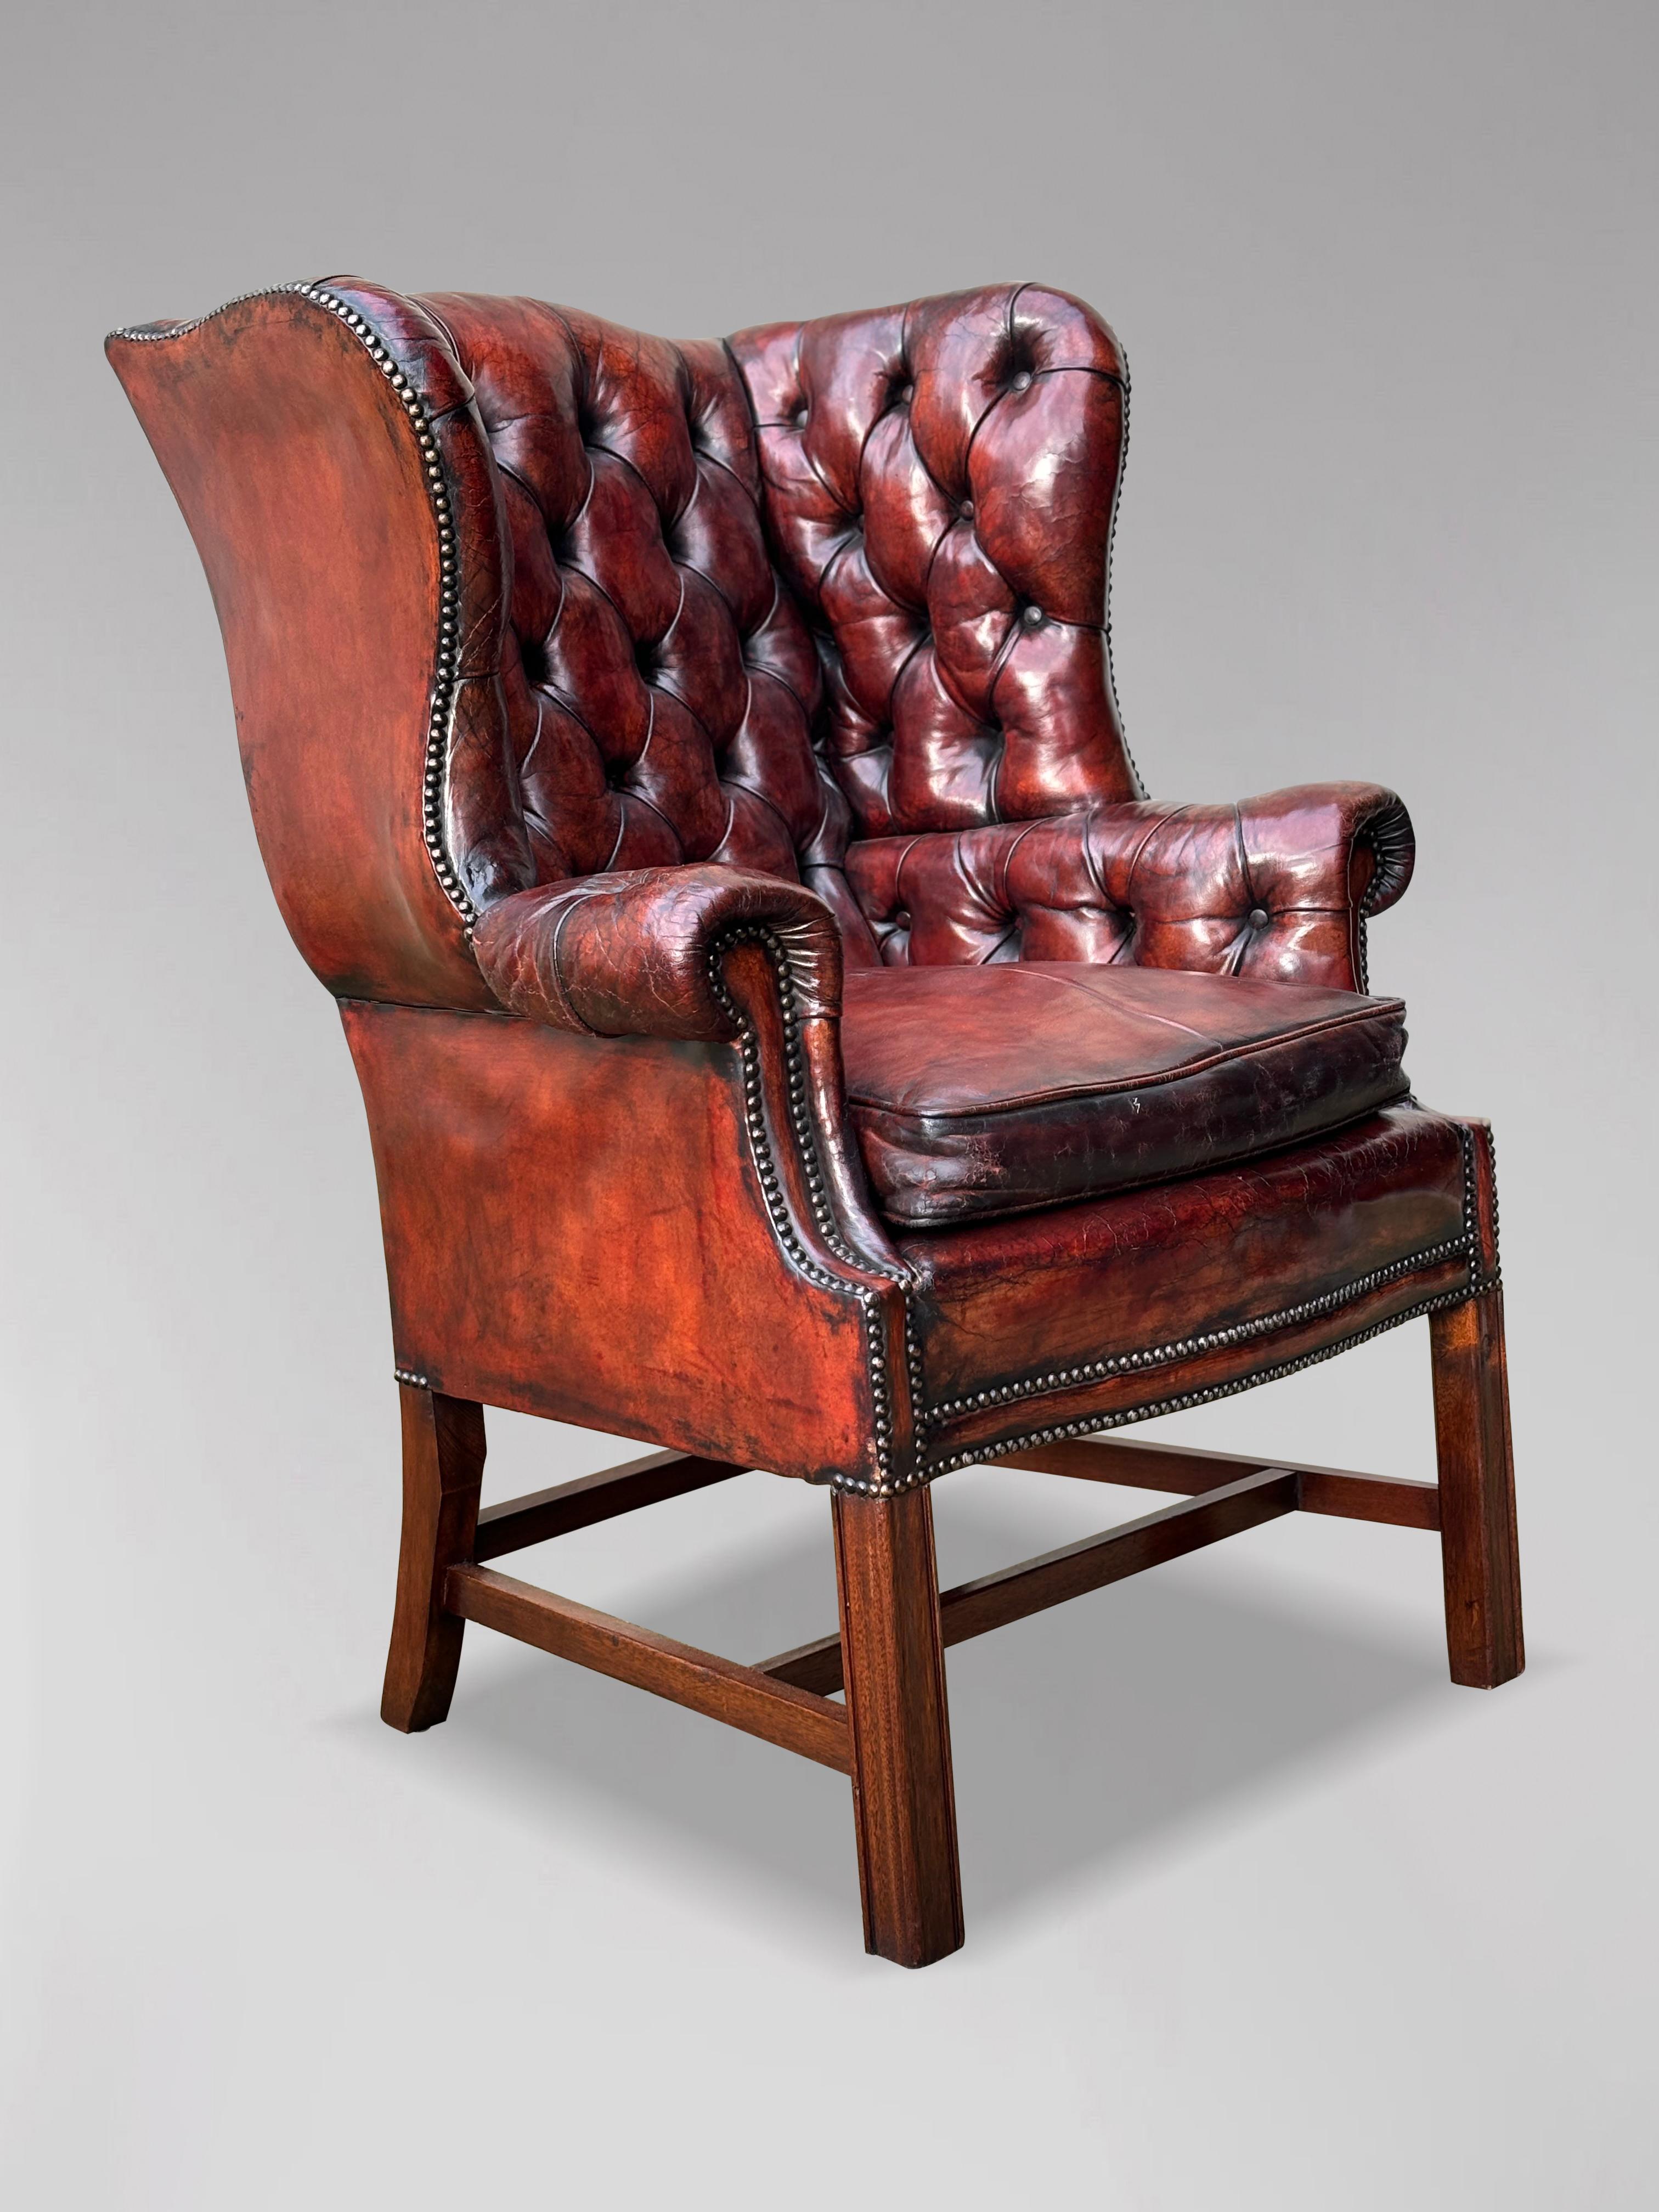 19th Century, Georgian, Burgundy Leather Wing Armchair In Good Condition For Sale In Petworth,West Sussex, GB